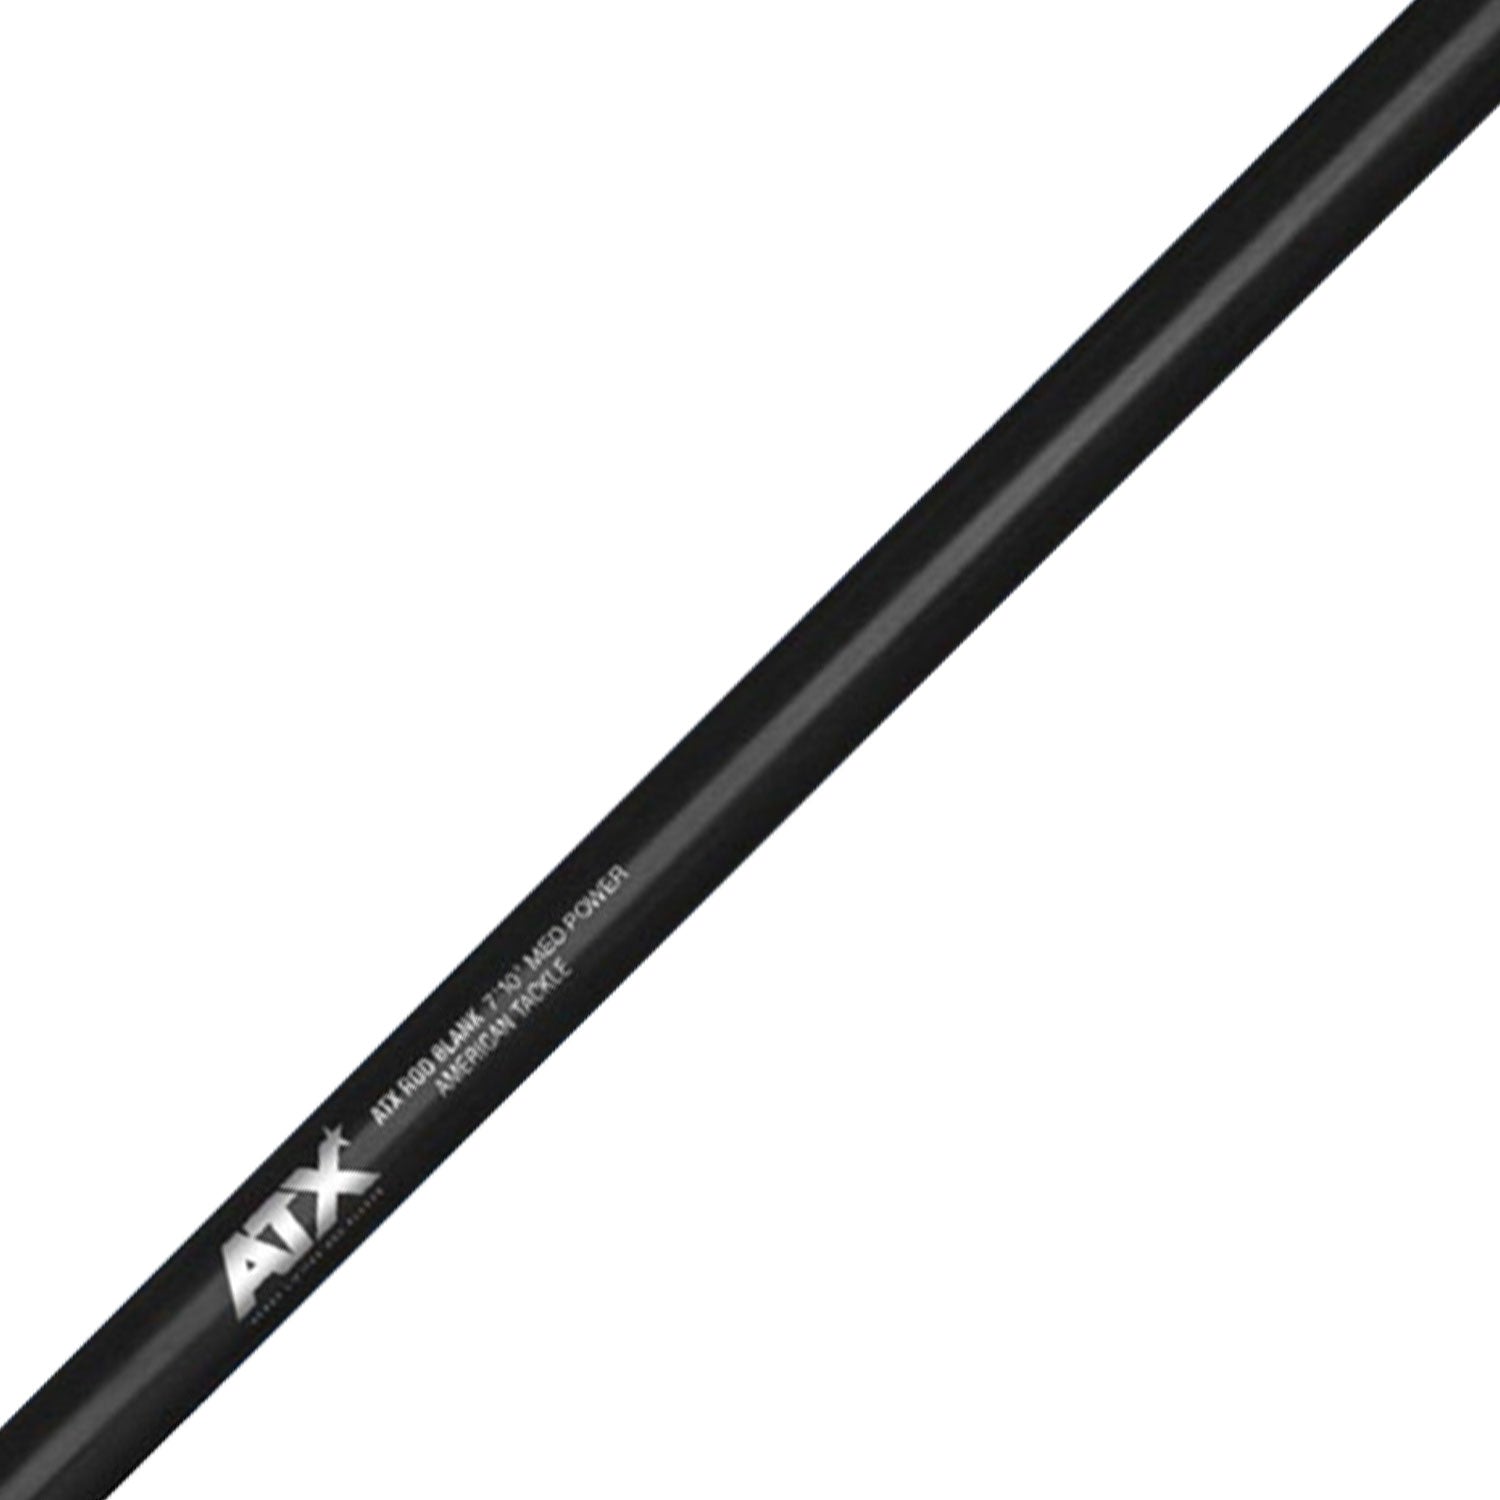 American Tackle AXST66H Stand-Up Tuna Rod Blank